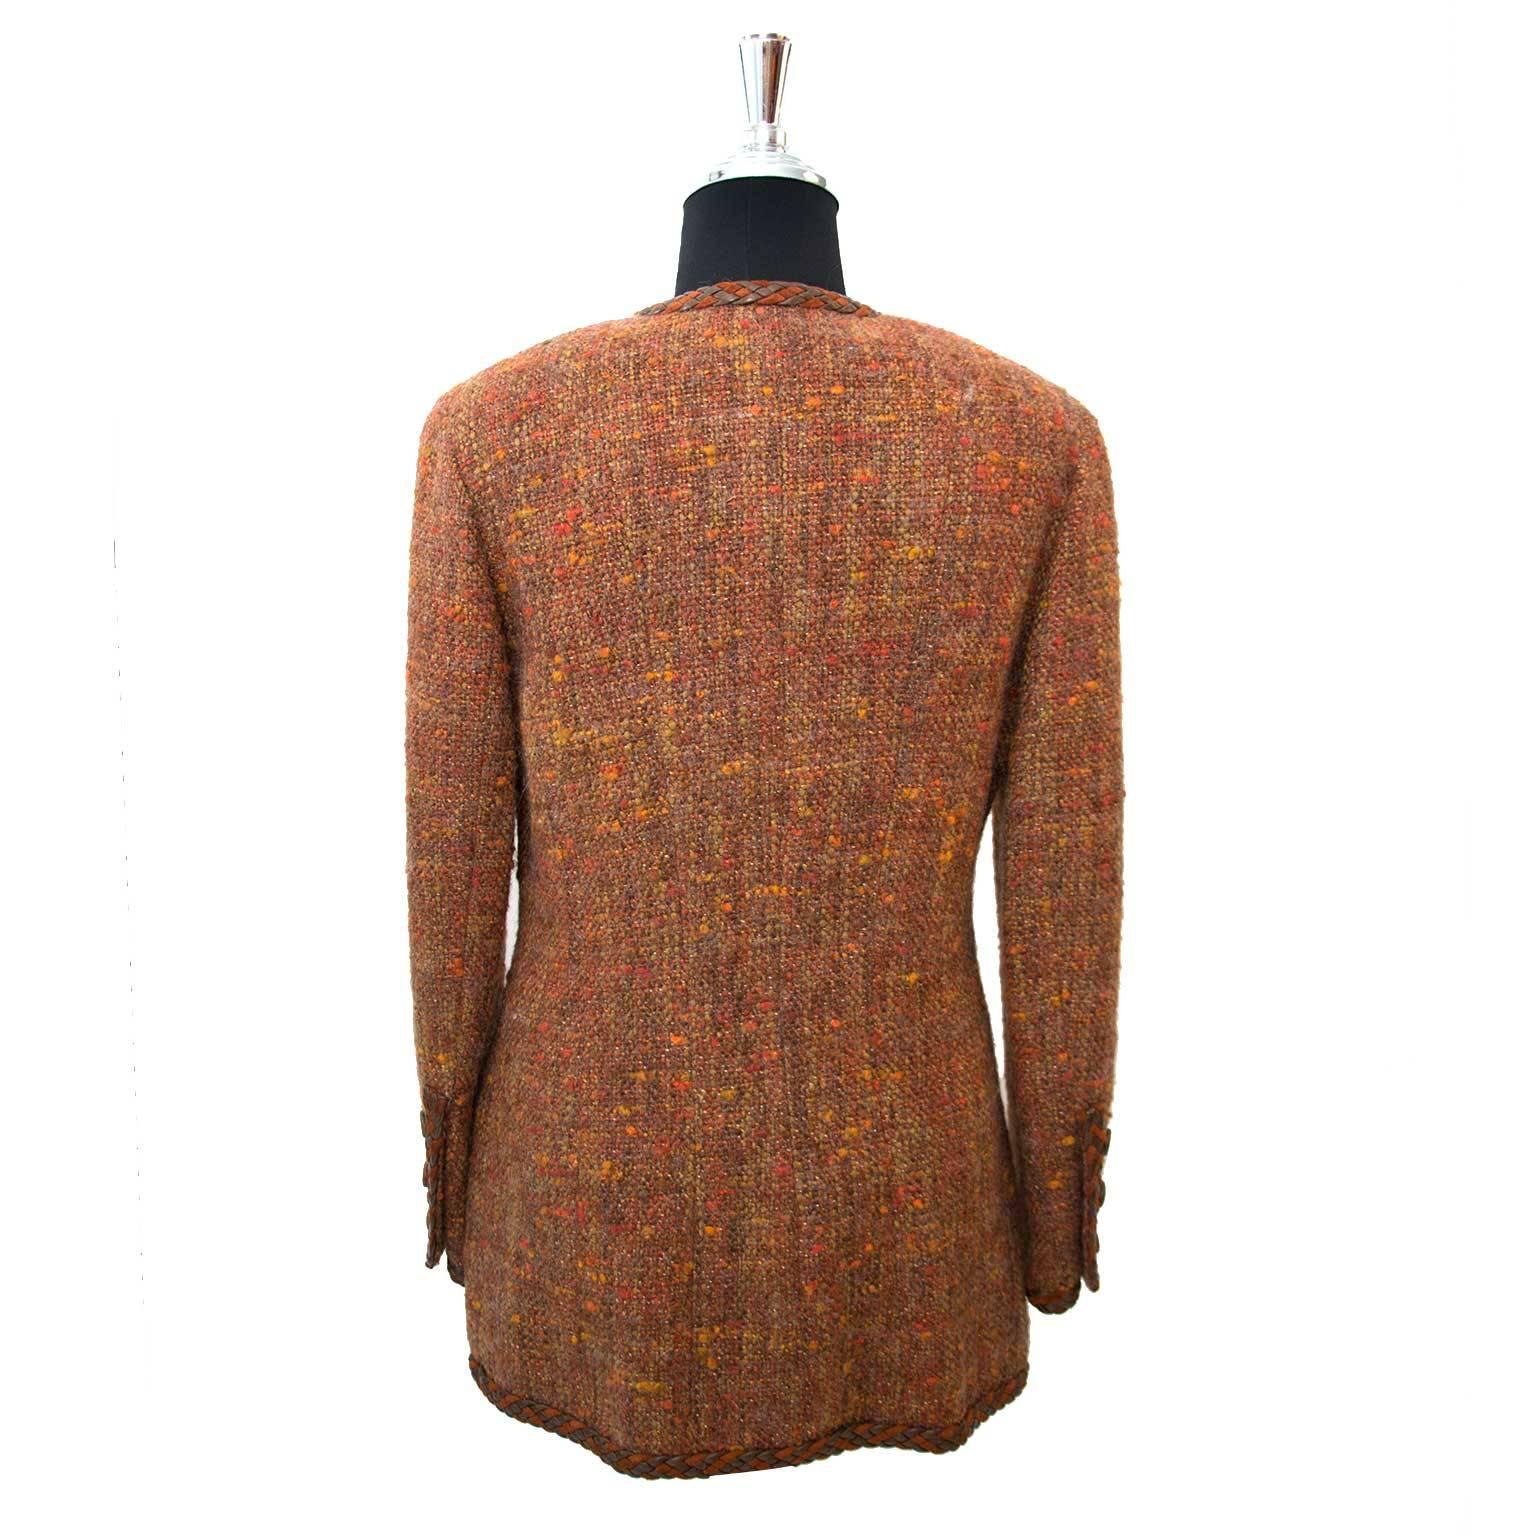 Very good preloved condition

Chanel Autumn Wool Blazer - size: 40

This iconic piece is a timeless beauty in your closet. With brown, orange and yellow tones, this stylish jacket is perfect for a autumn day.
The blazer is finished with brown